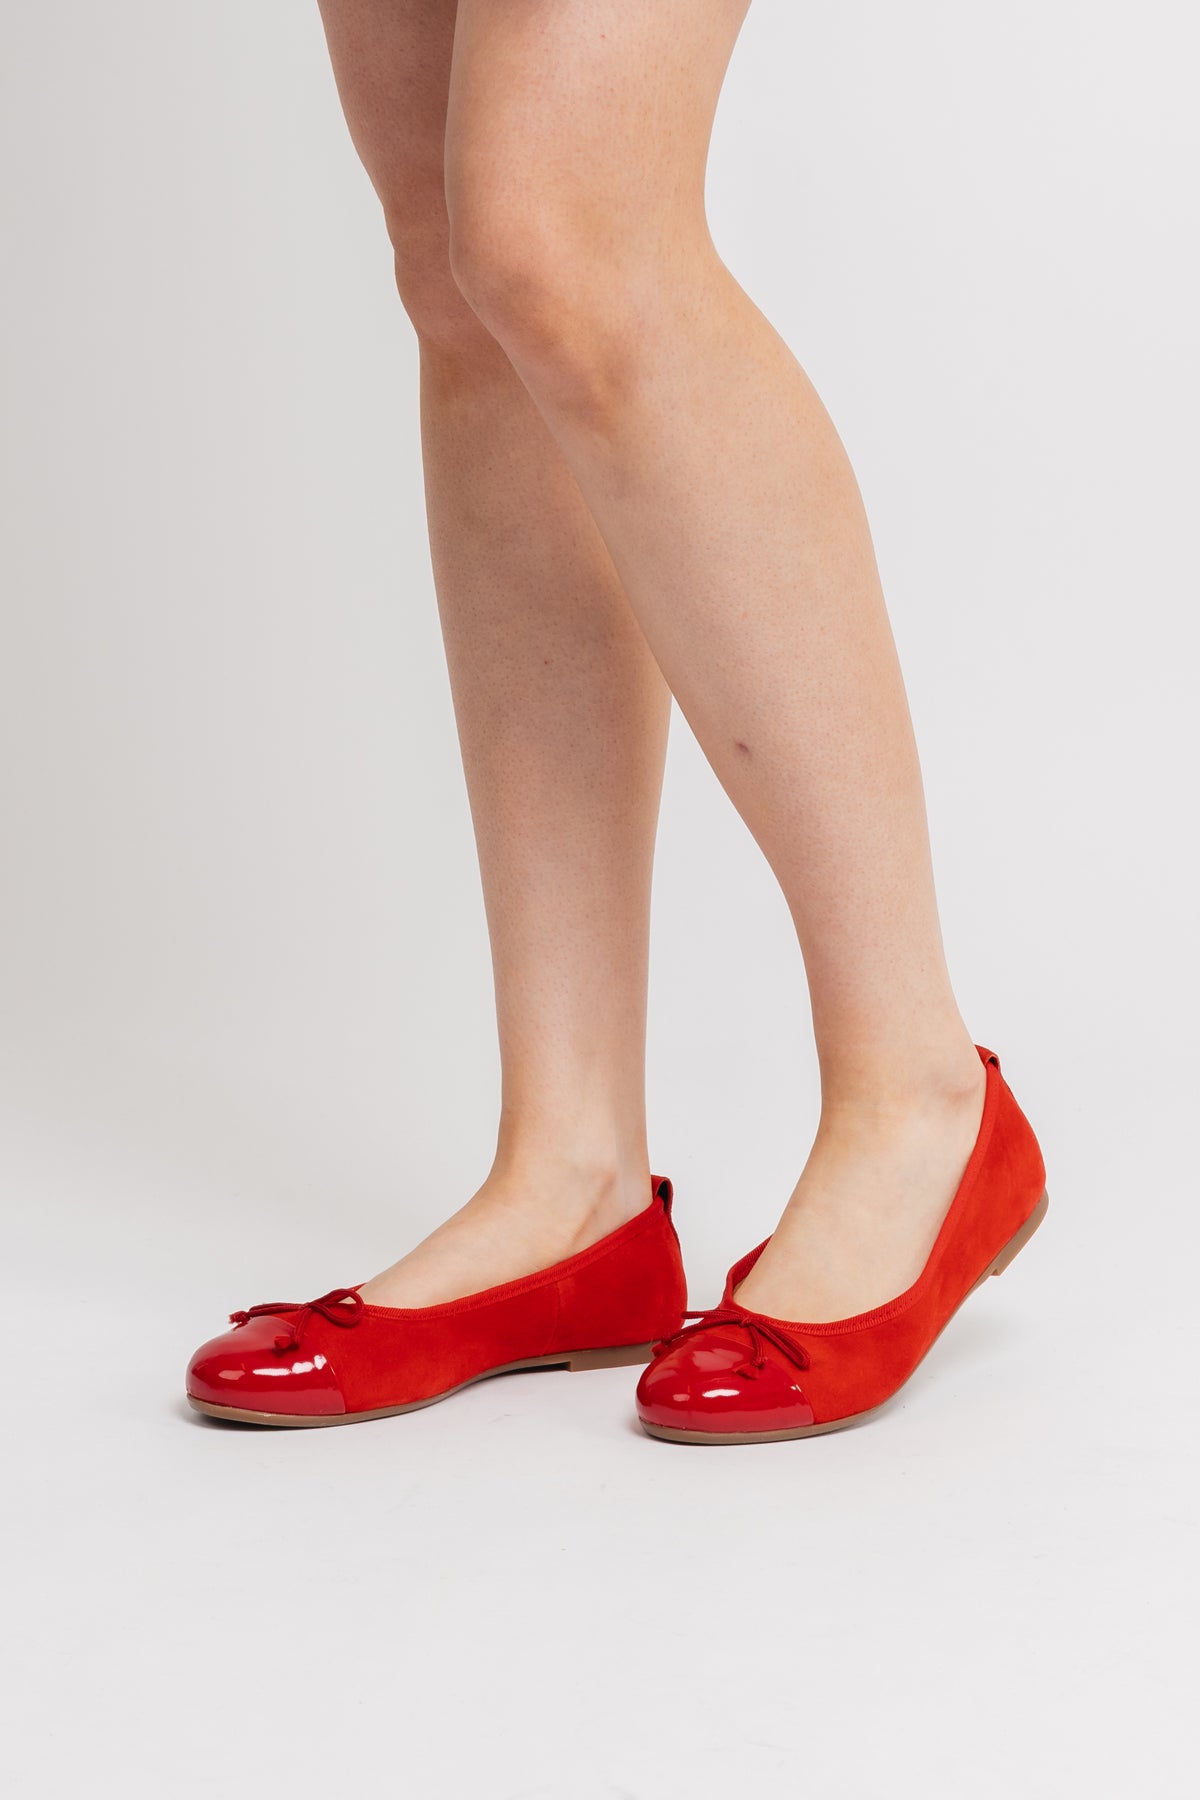 Lucy Lu - Red/Patent